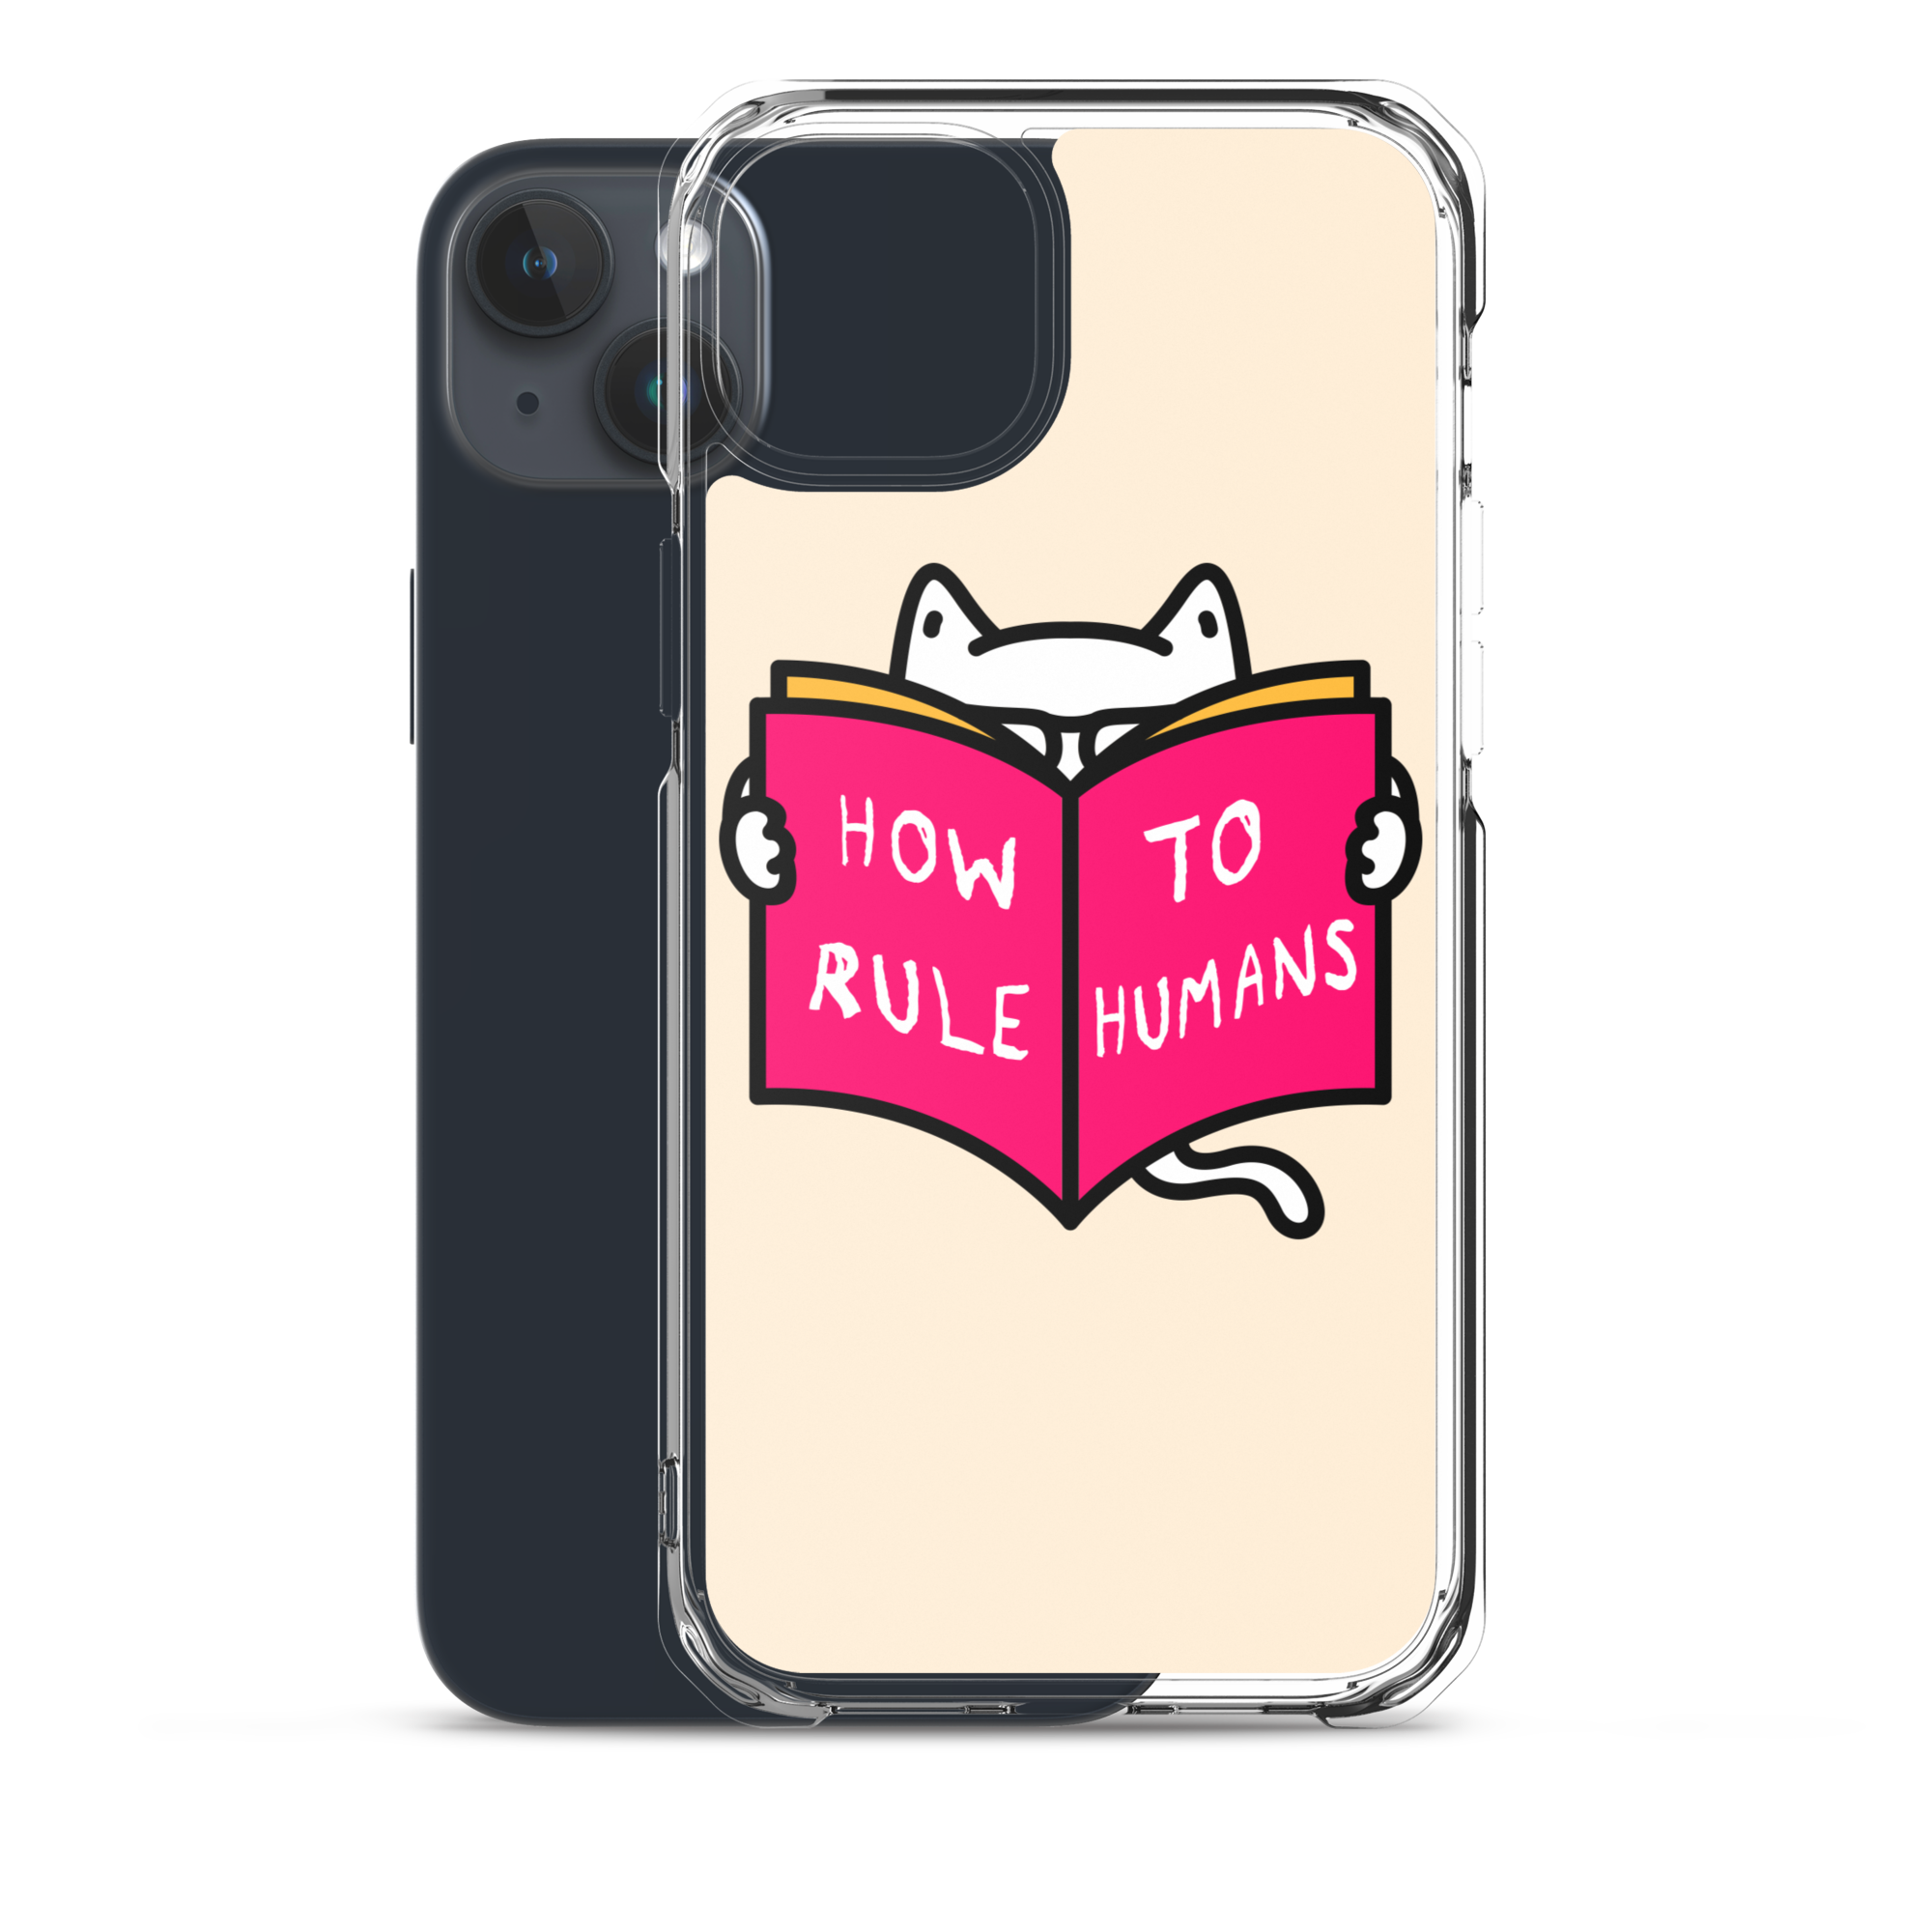 Carcasa transparente iPhone® How to rule humans